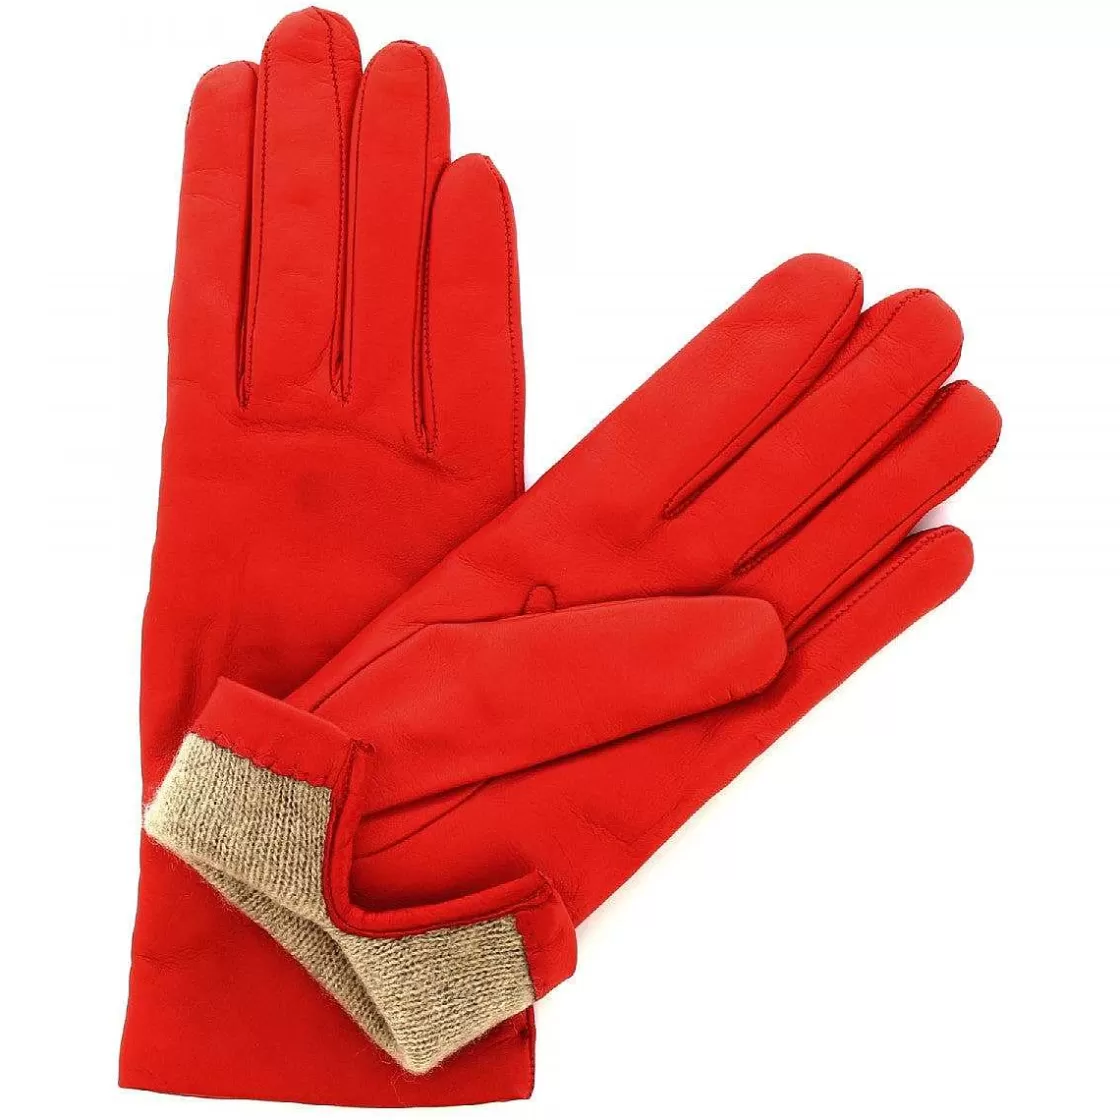 Leonardo Classic Women'S Gloves Handmade In Red Nappa Leather Lined In Cashmere Hot